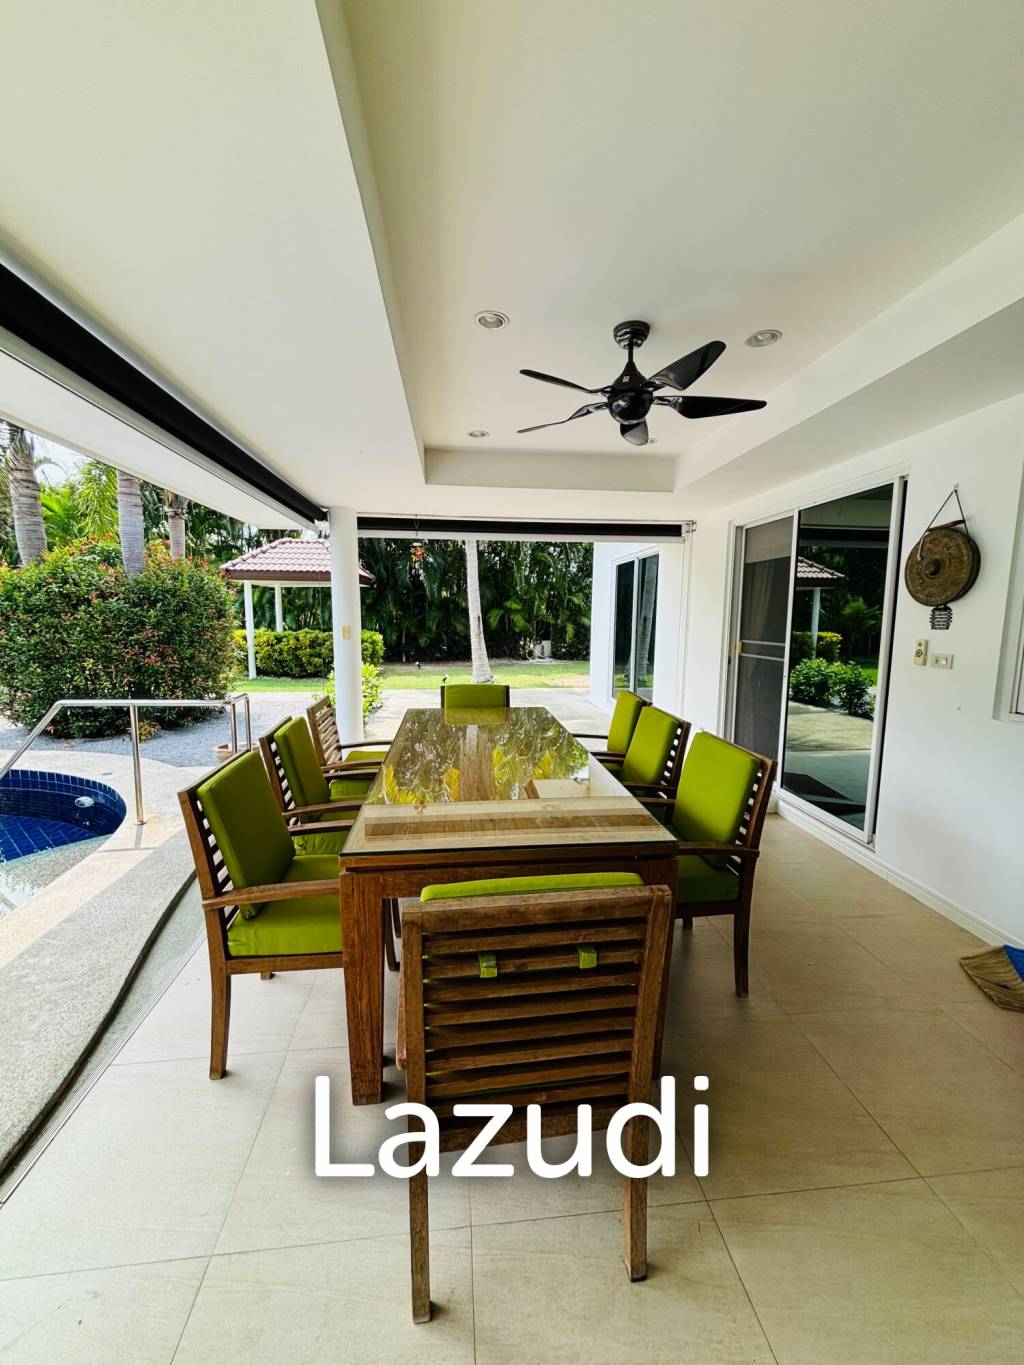 GROVE RESIDENCES ( NEW RENOVATED ) : 4 bed Bali Style pool villa